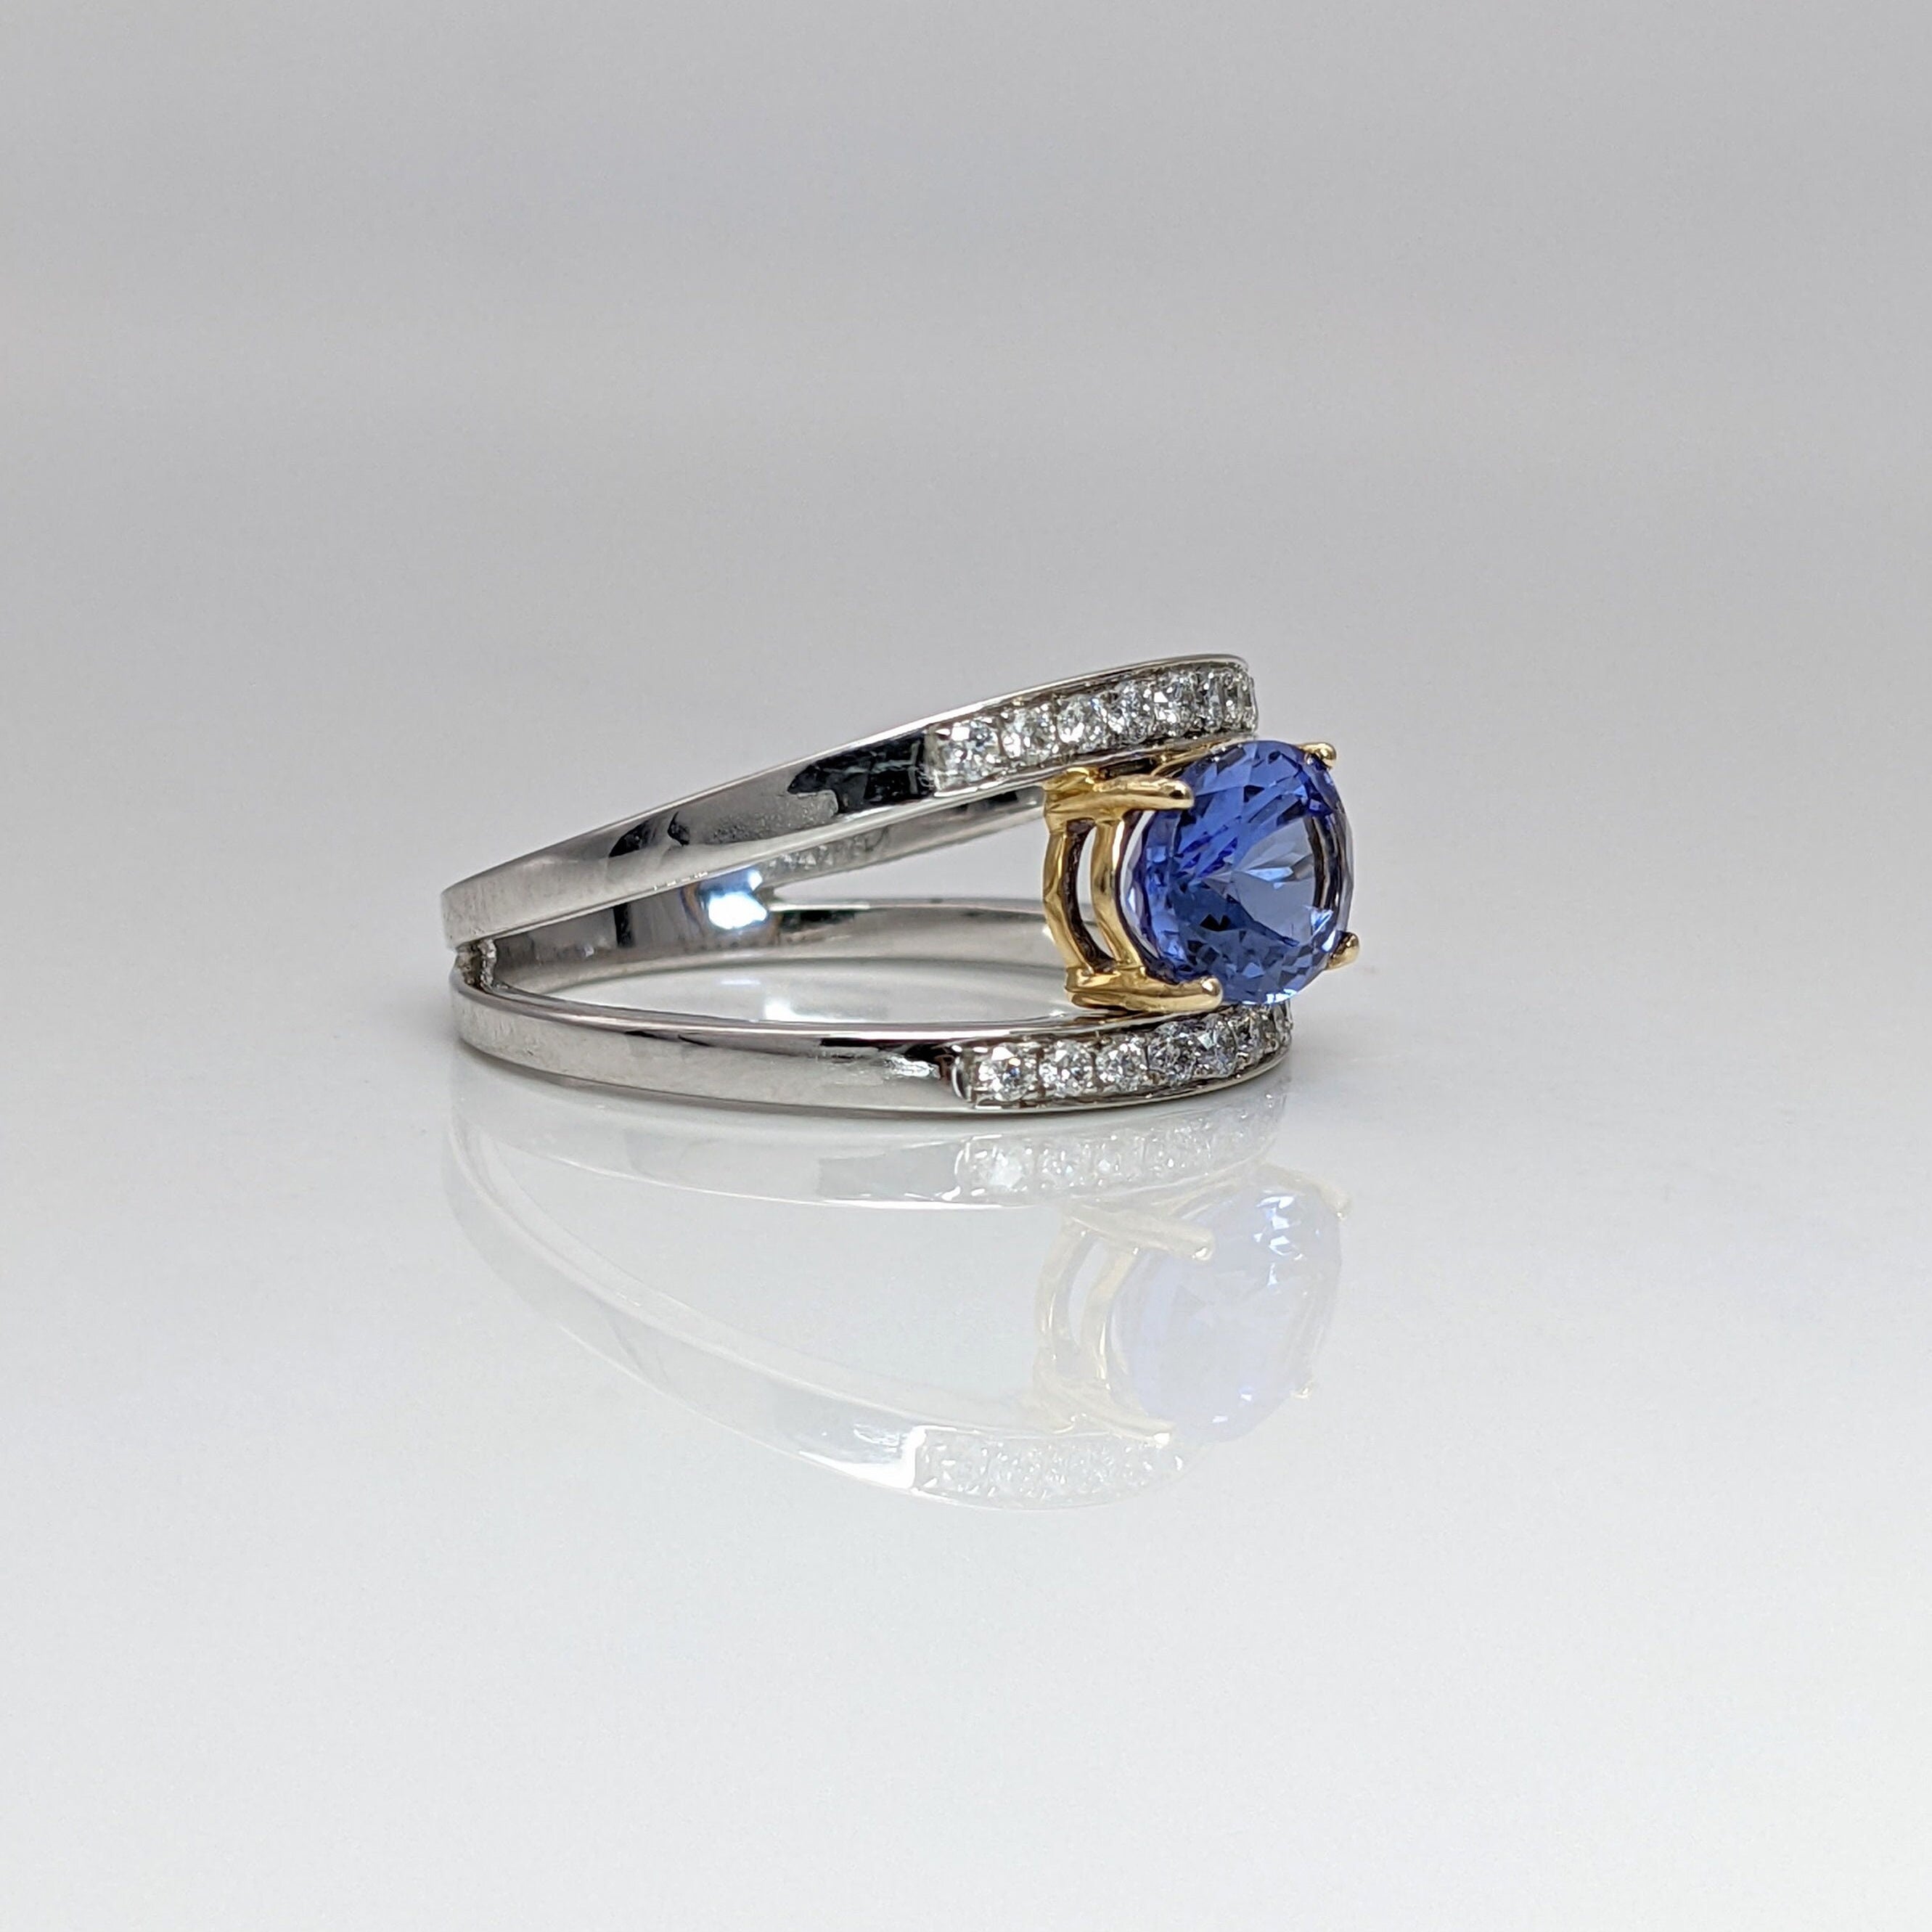 Statement Rings-CLOSEOUT SALE! Tanzanite Ring in Two Tone Solid 14k Yellow and White Gold w Natural Diamond Accents | East West Ring | Oval 8x6mm - NNJGemstones